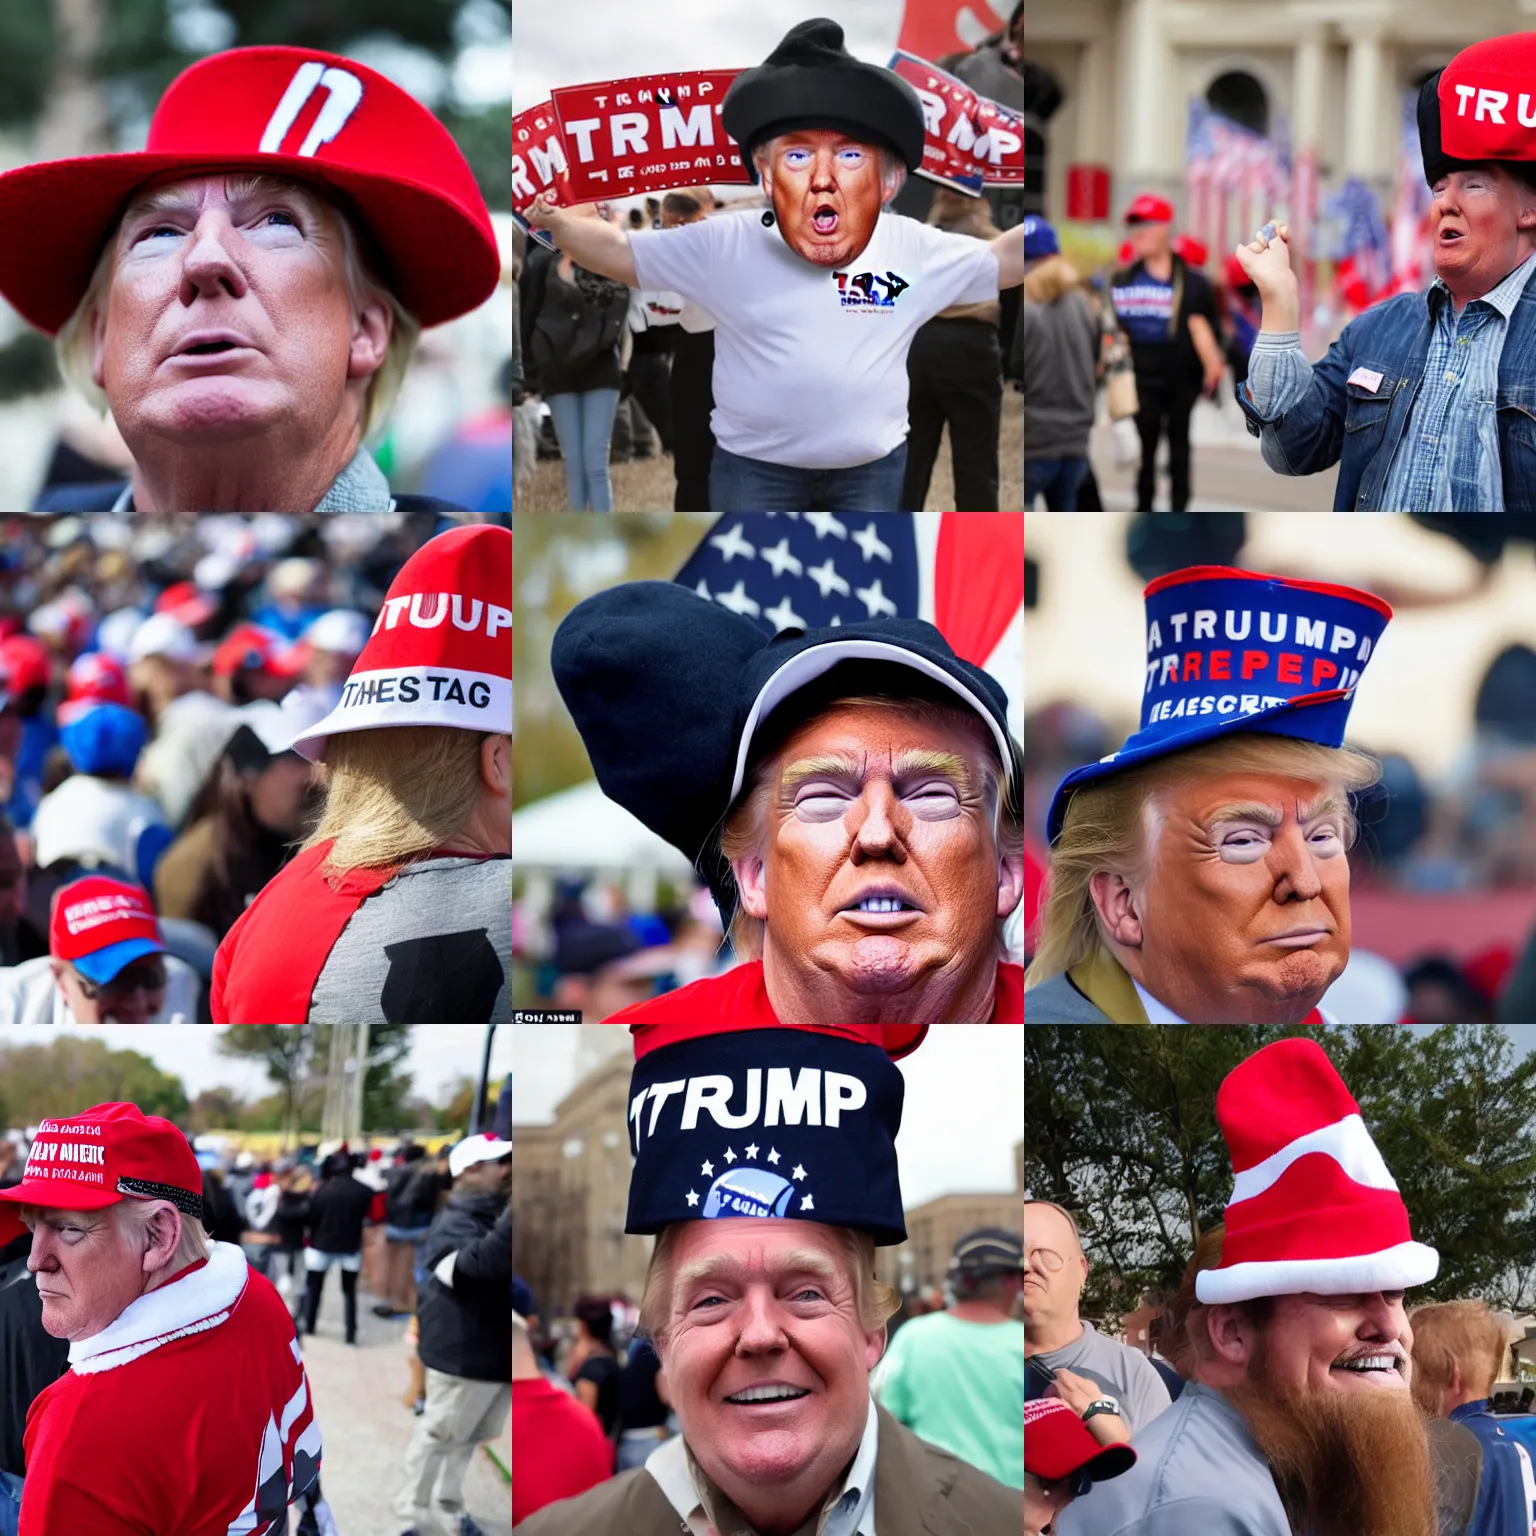 Prompt: a trump supporter with a very large head and a comically small hat. The hat is much too small for the person's head, and appears to be hurting them